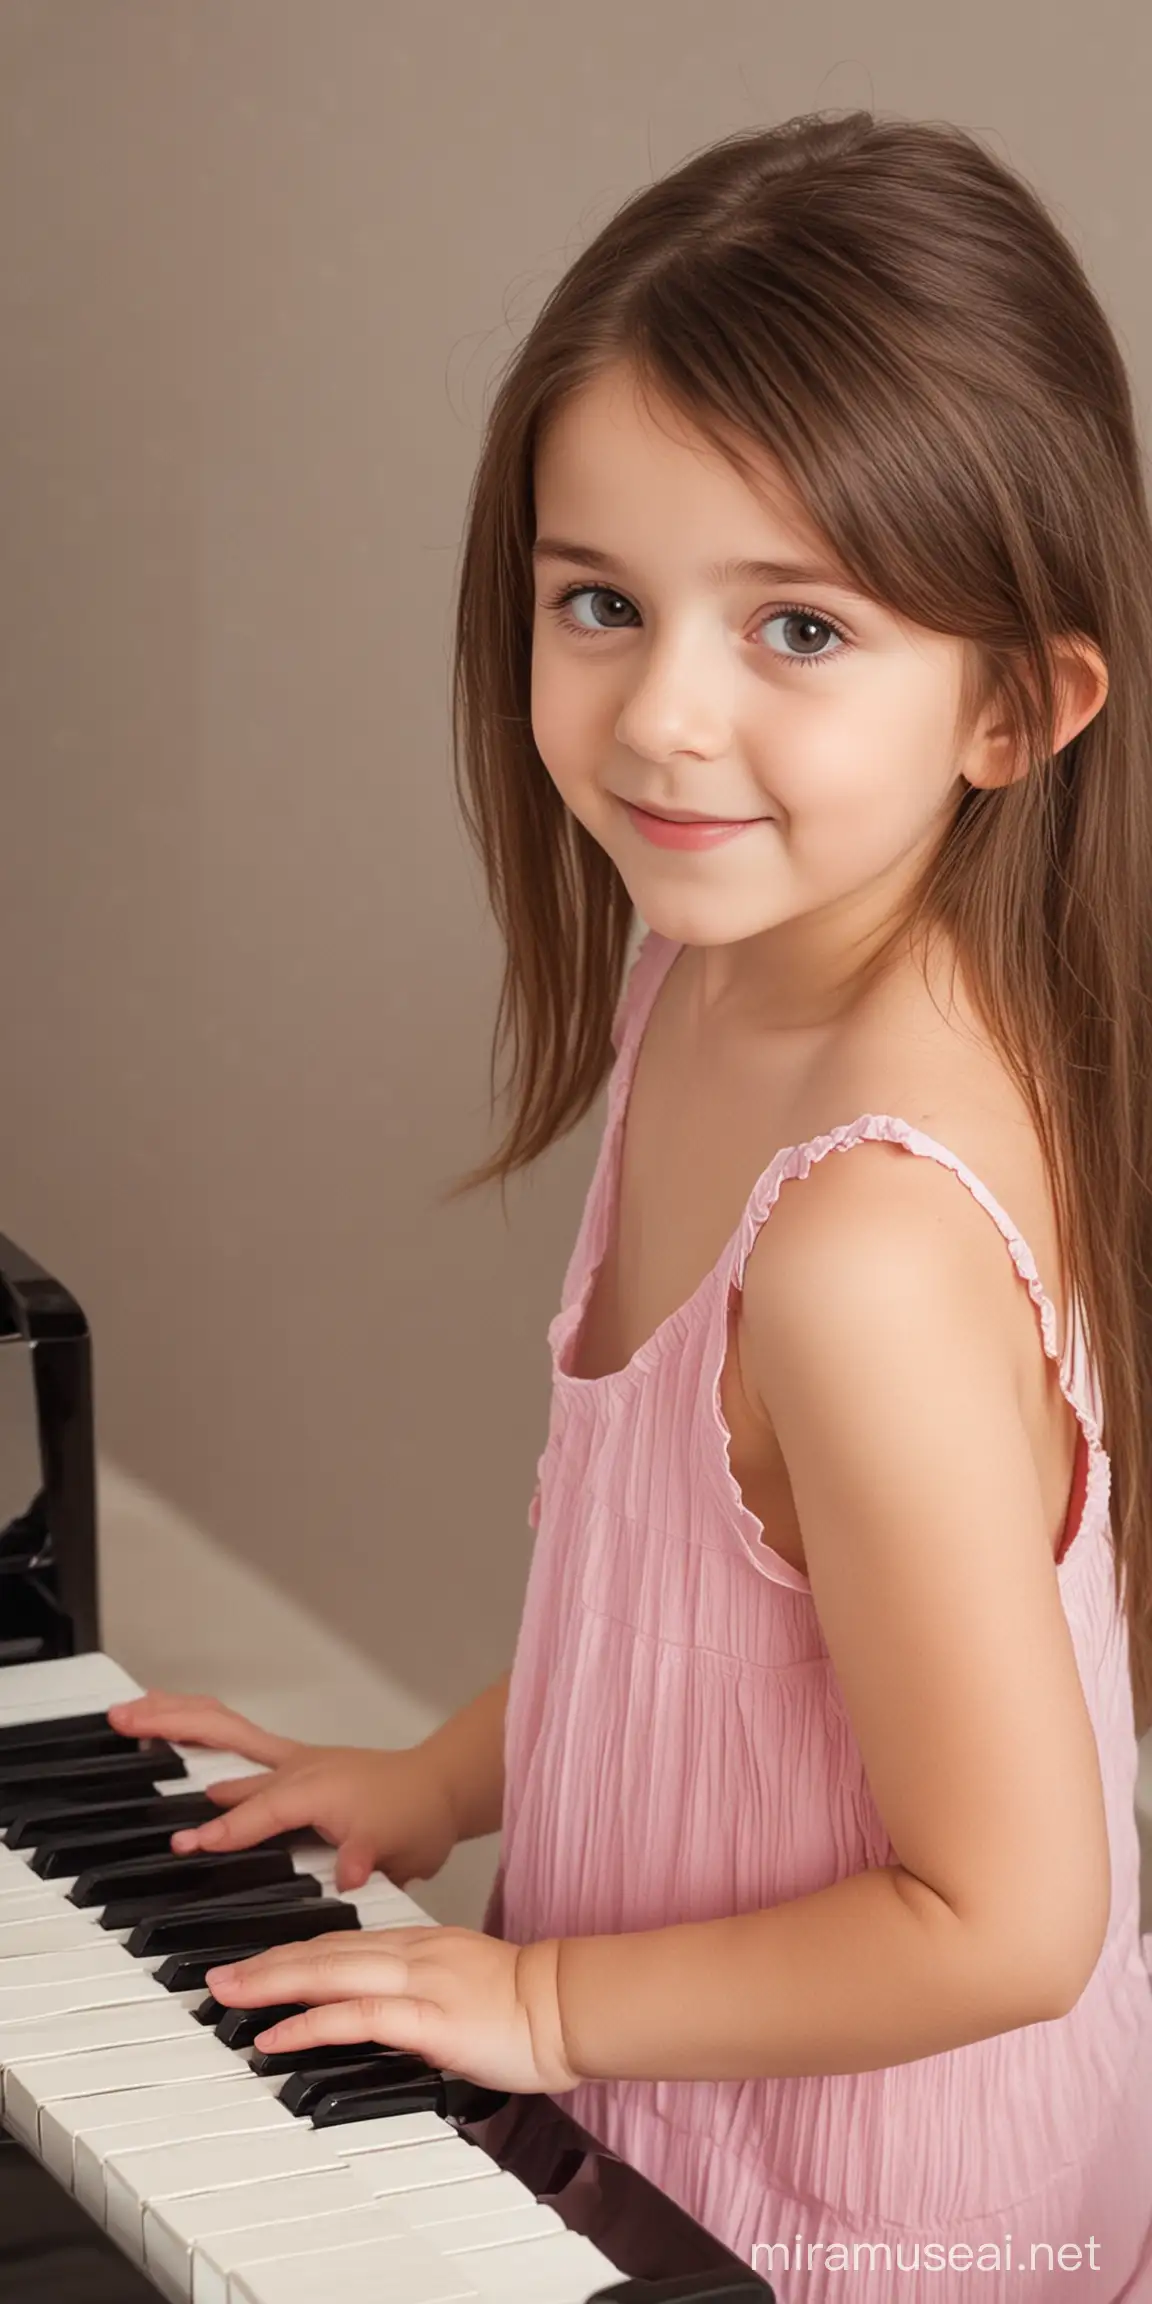 Piano learning for children and singing

